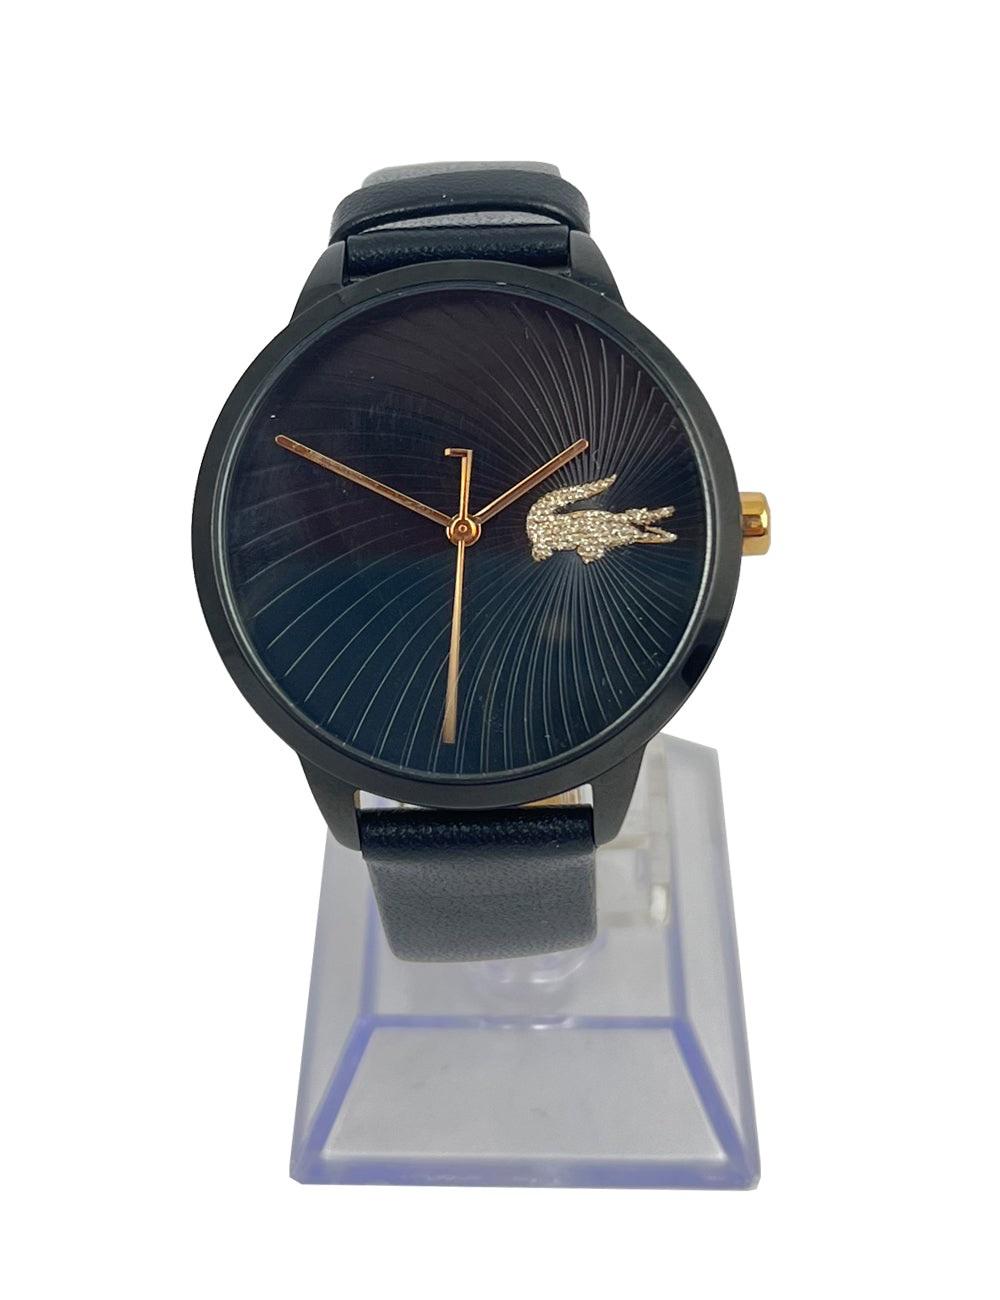 All-black stainless steel Lacoste watch with glitter Lacoste crocodile detail on round watch face.

Additional information:
Overall condition: Great
Extras: Includes original box
